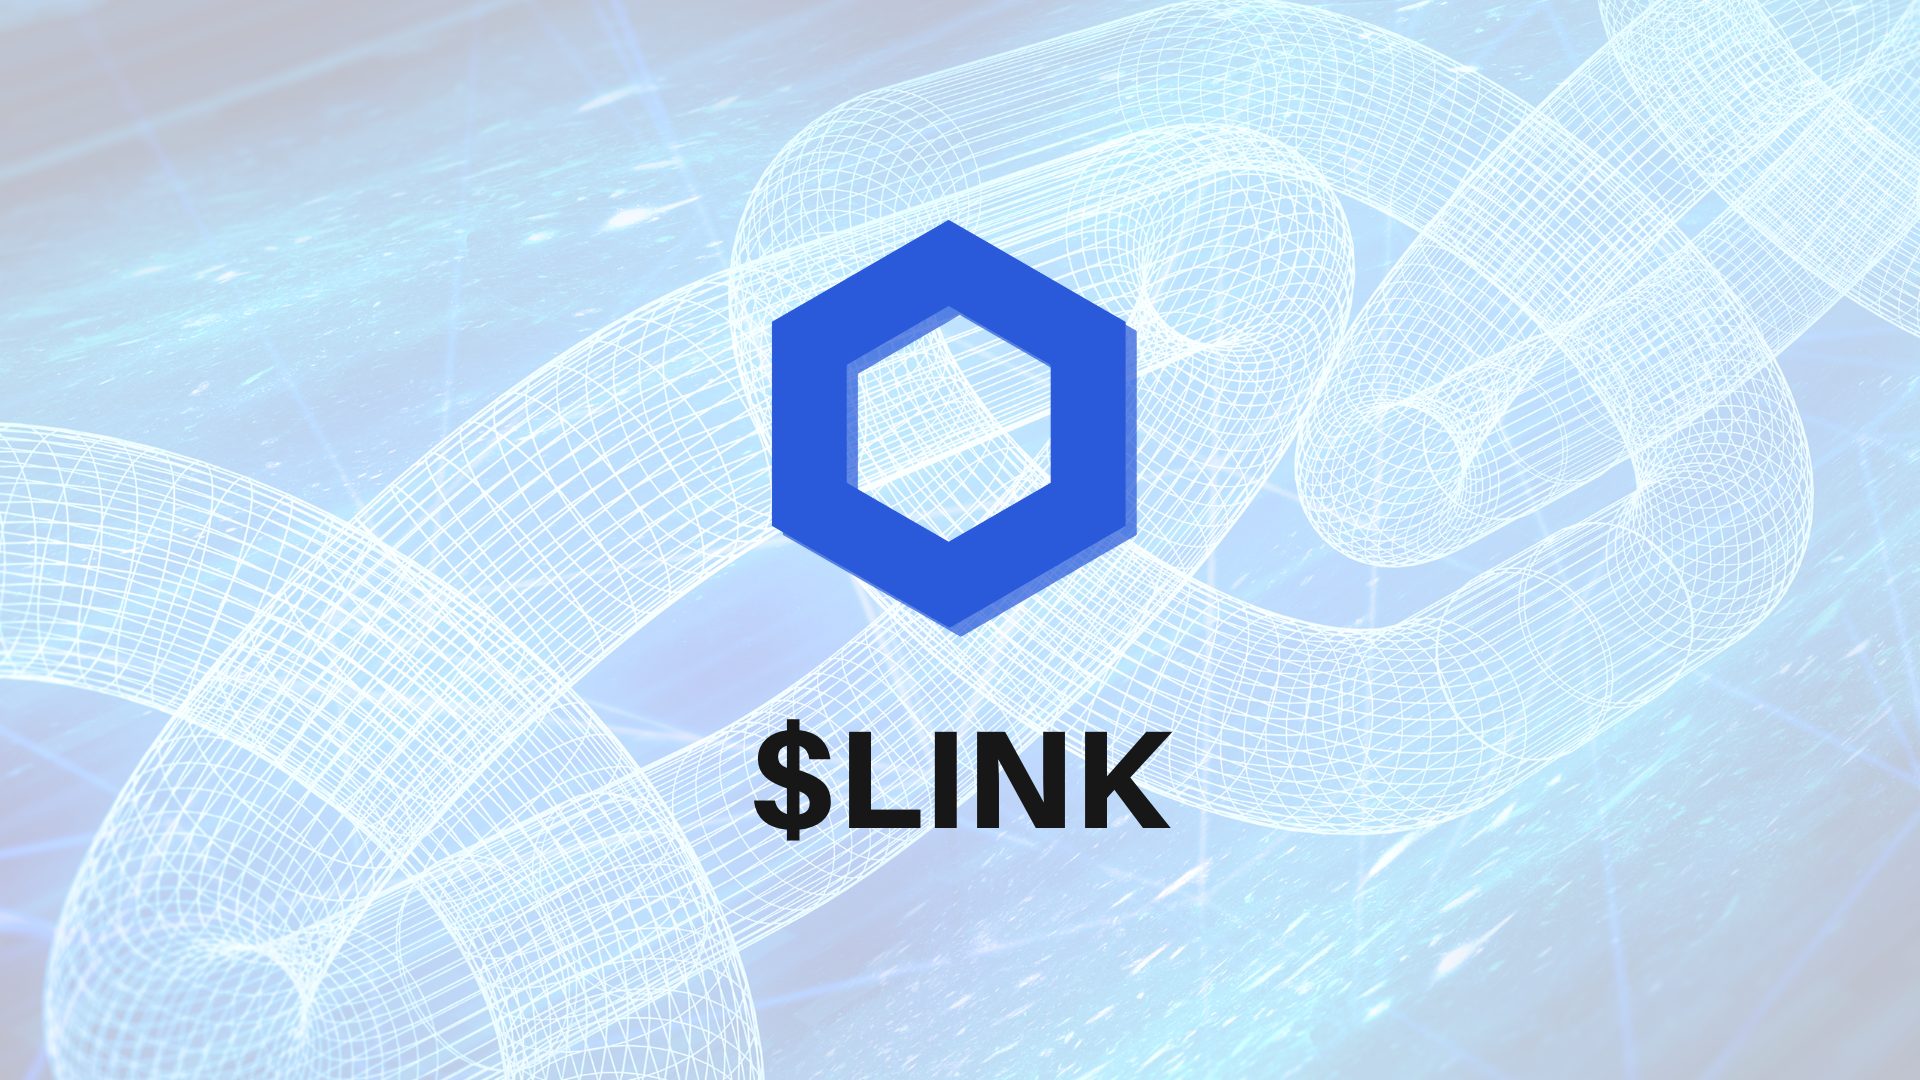 Chainlink banner featuring the LINK cashtag.